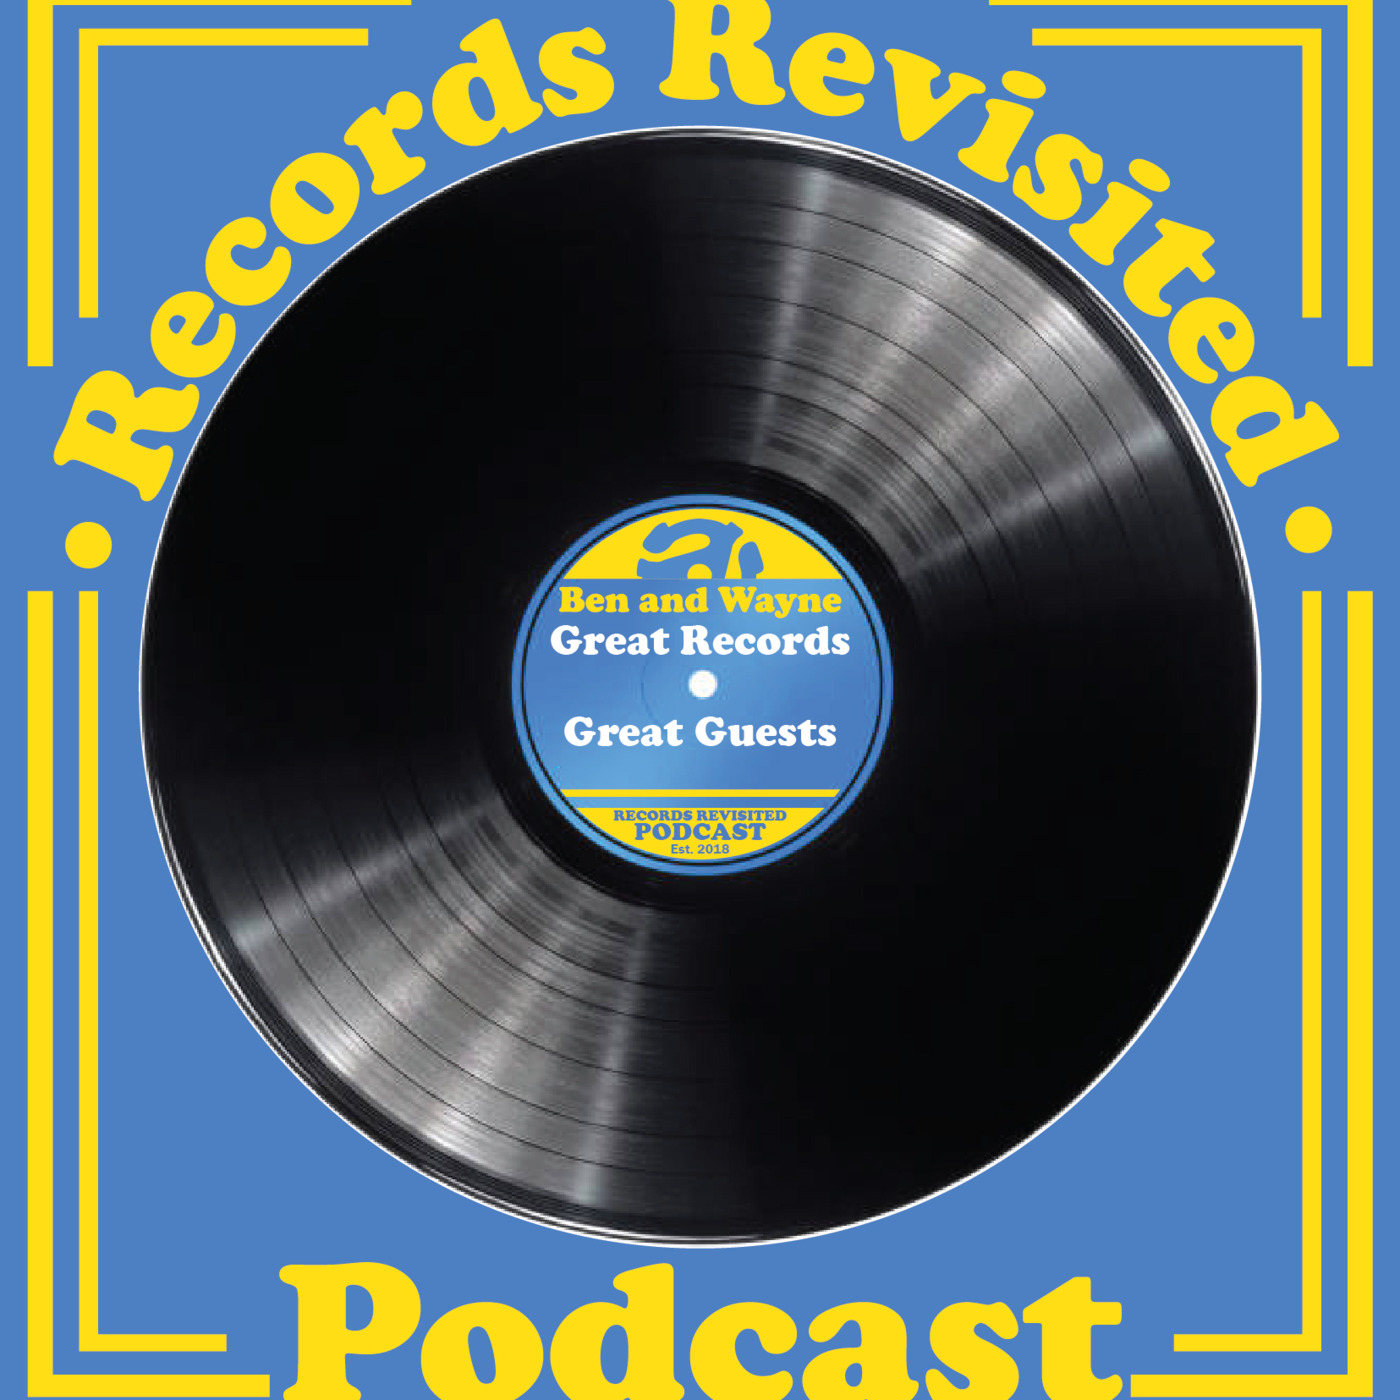 Records Revisited